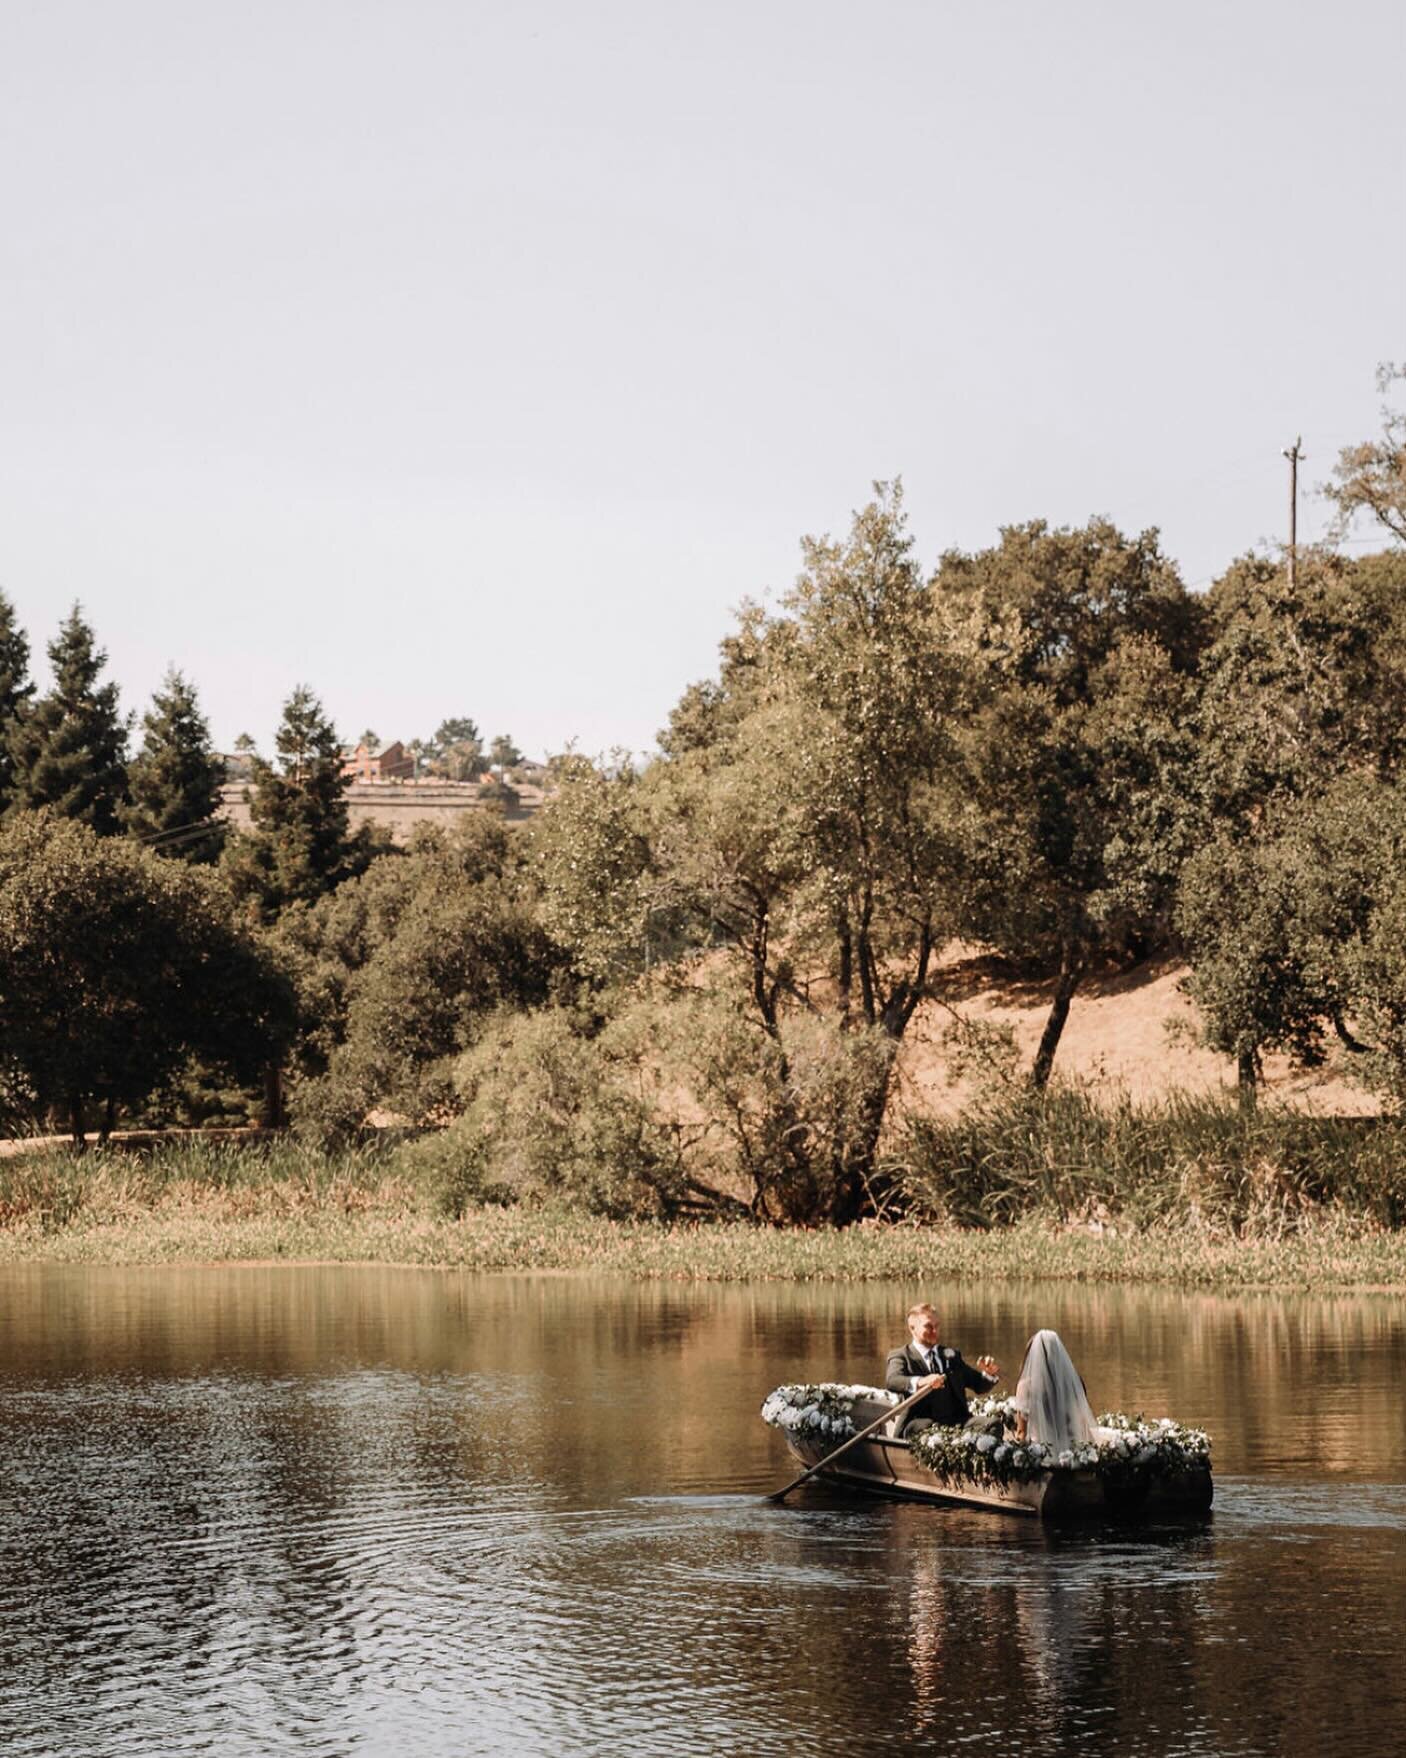 Already floating into 2025 with weddings booking up! Couples are planning further and further ahead every year. Making the planning experience less stressful and more time to book vendors they really connect with.
Reach out to schedule a chat 
📷 @gu